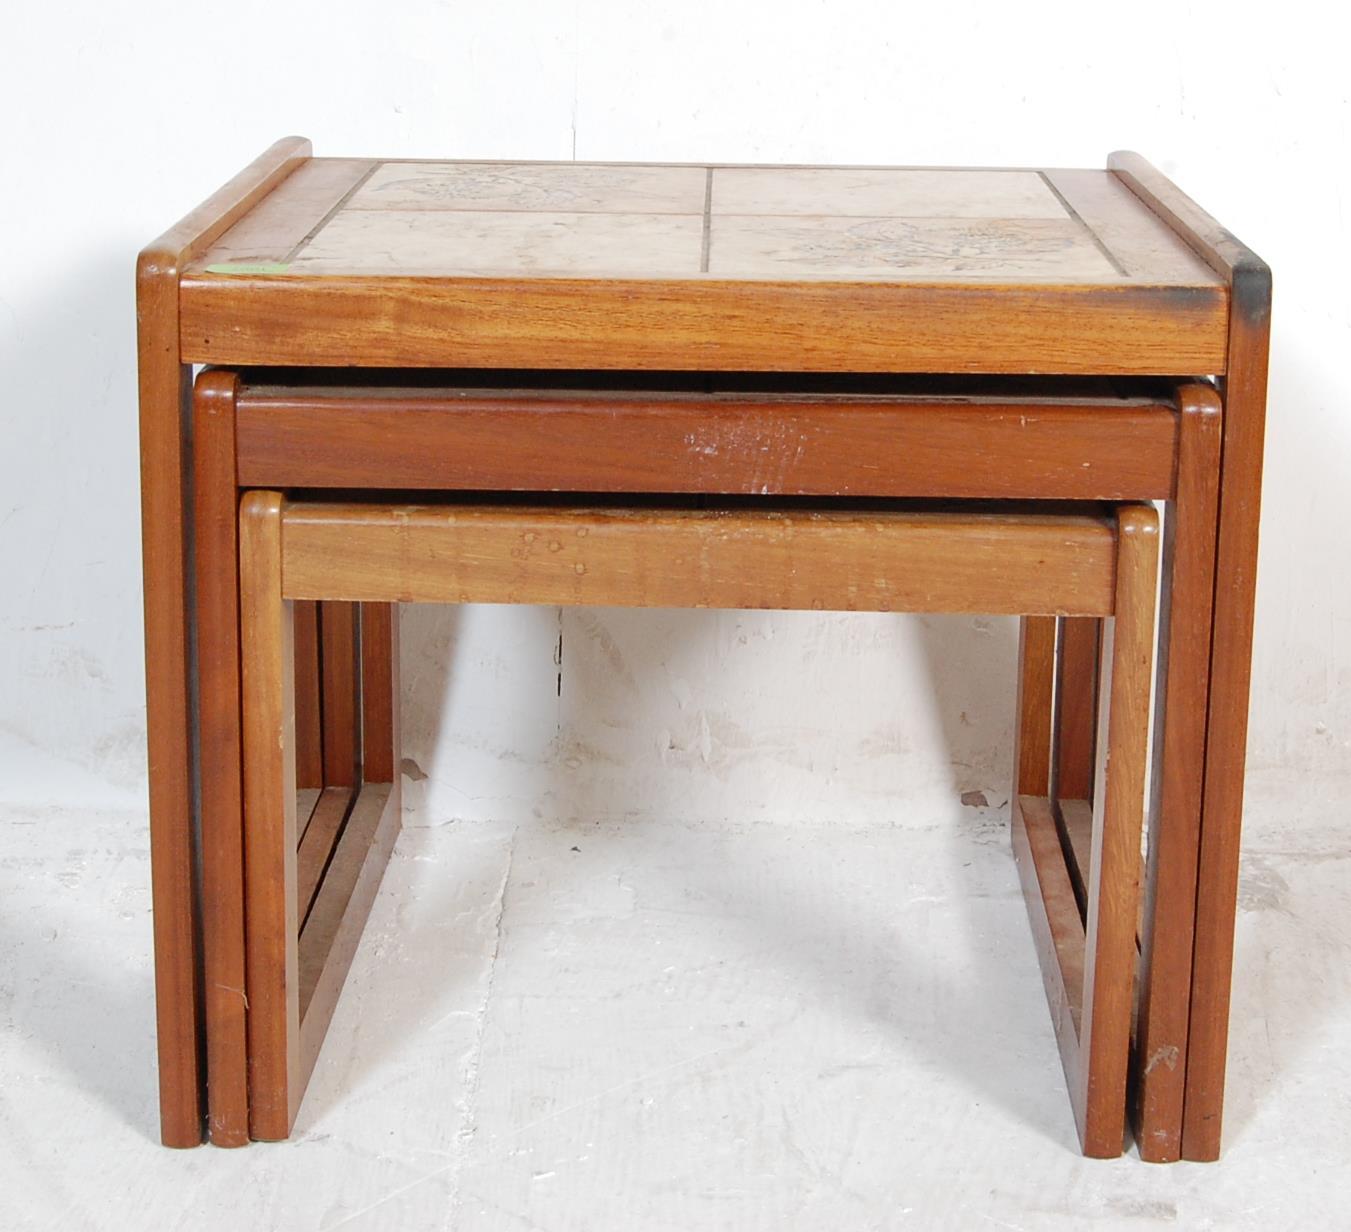 RETRO VINTAGE LATE 20TH CENTURY TILE TOP NEST OF TABLES - Image 6 of 6